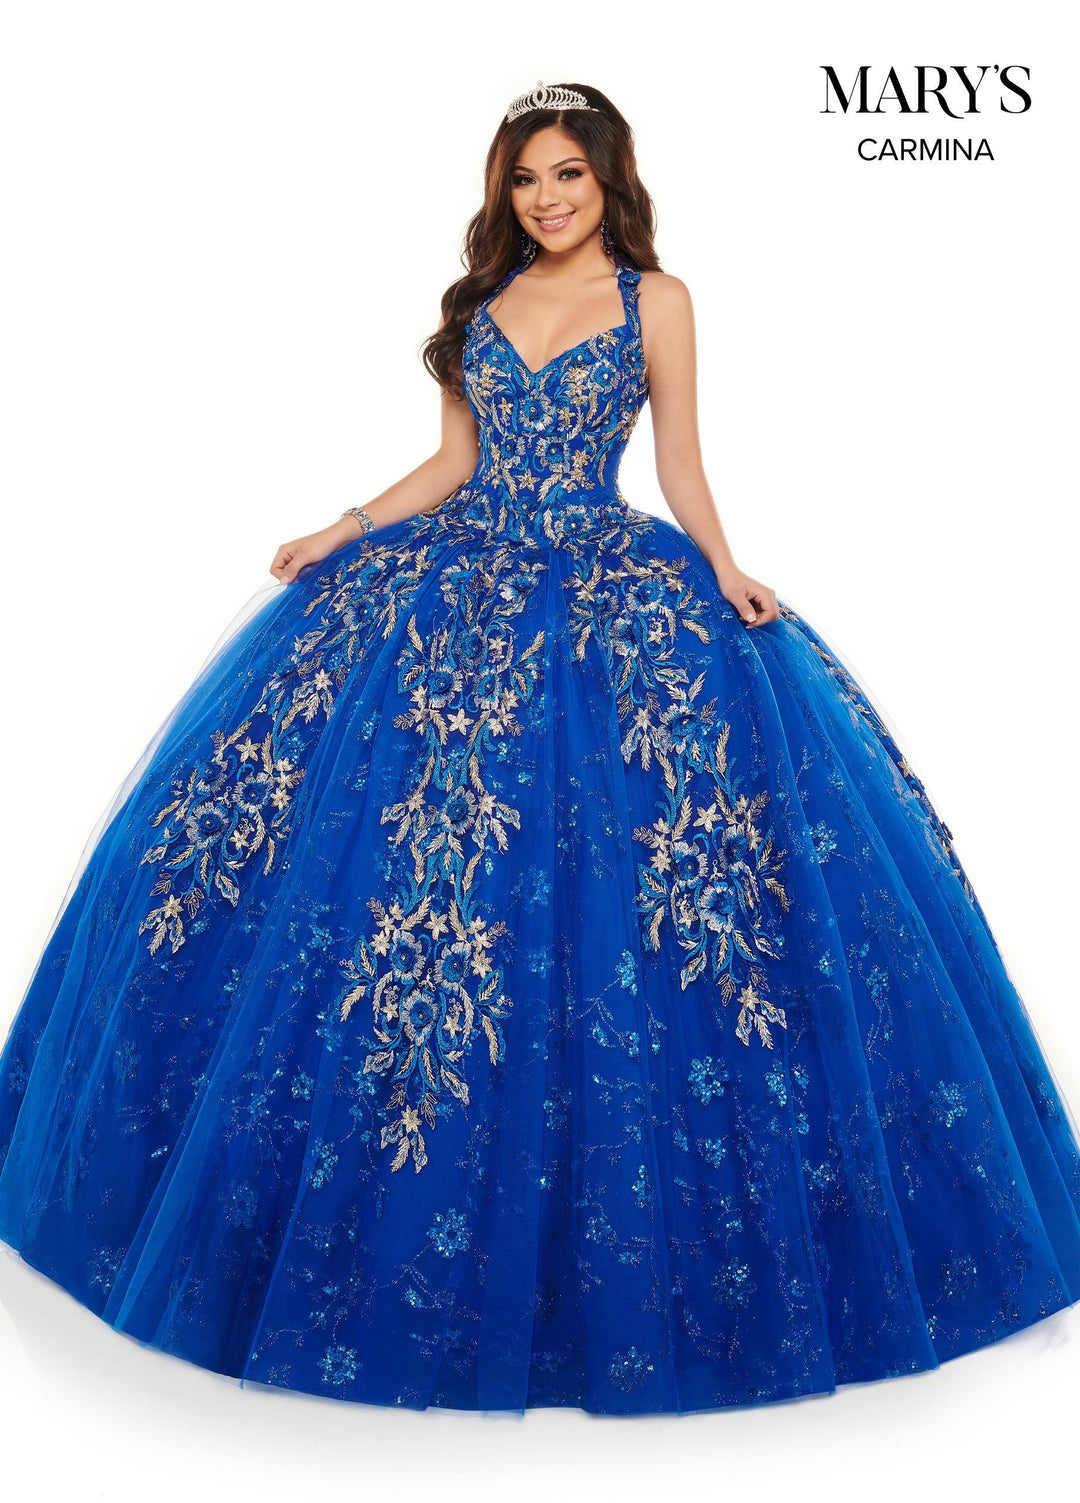 Floral Glitter Lace Quinceanera Dress by Mary's Bridal MQ1073